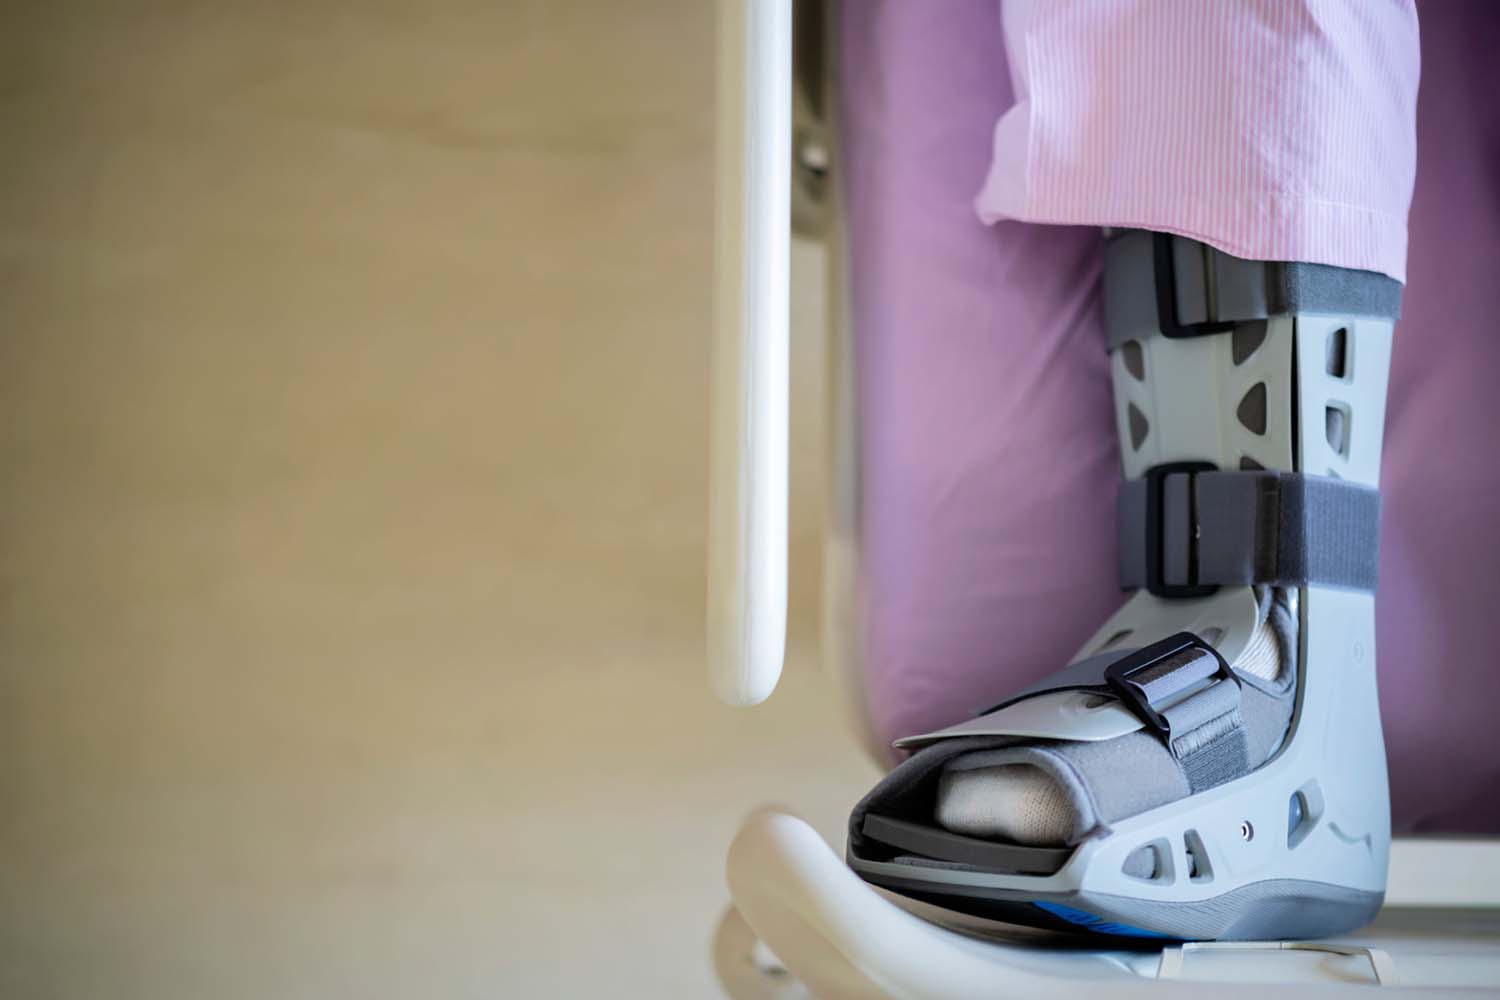 Ankle Foot Orthosis (AFO) as a Healthcare Innovation